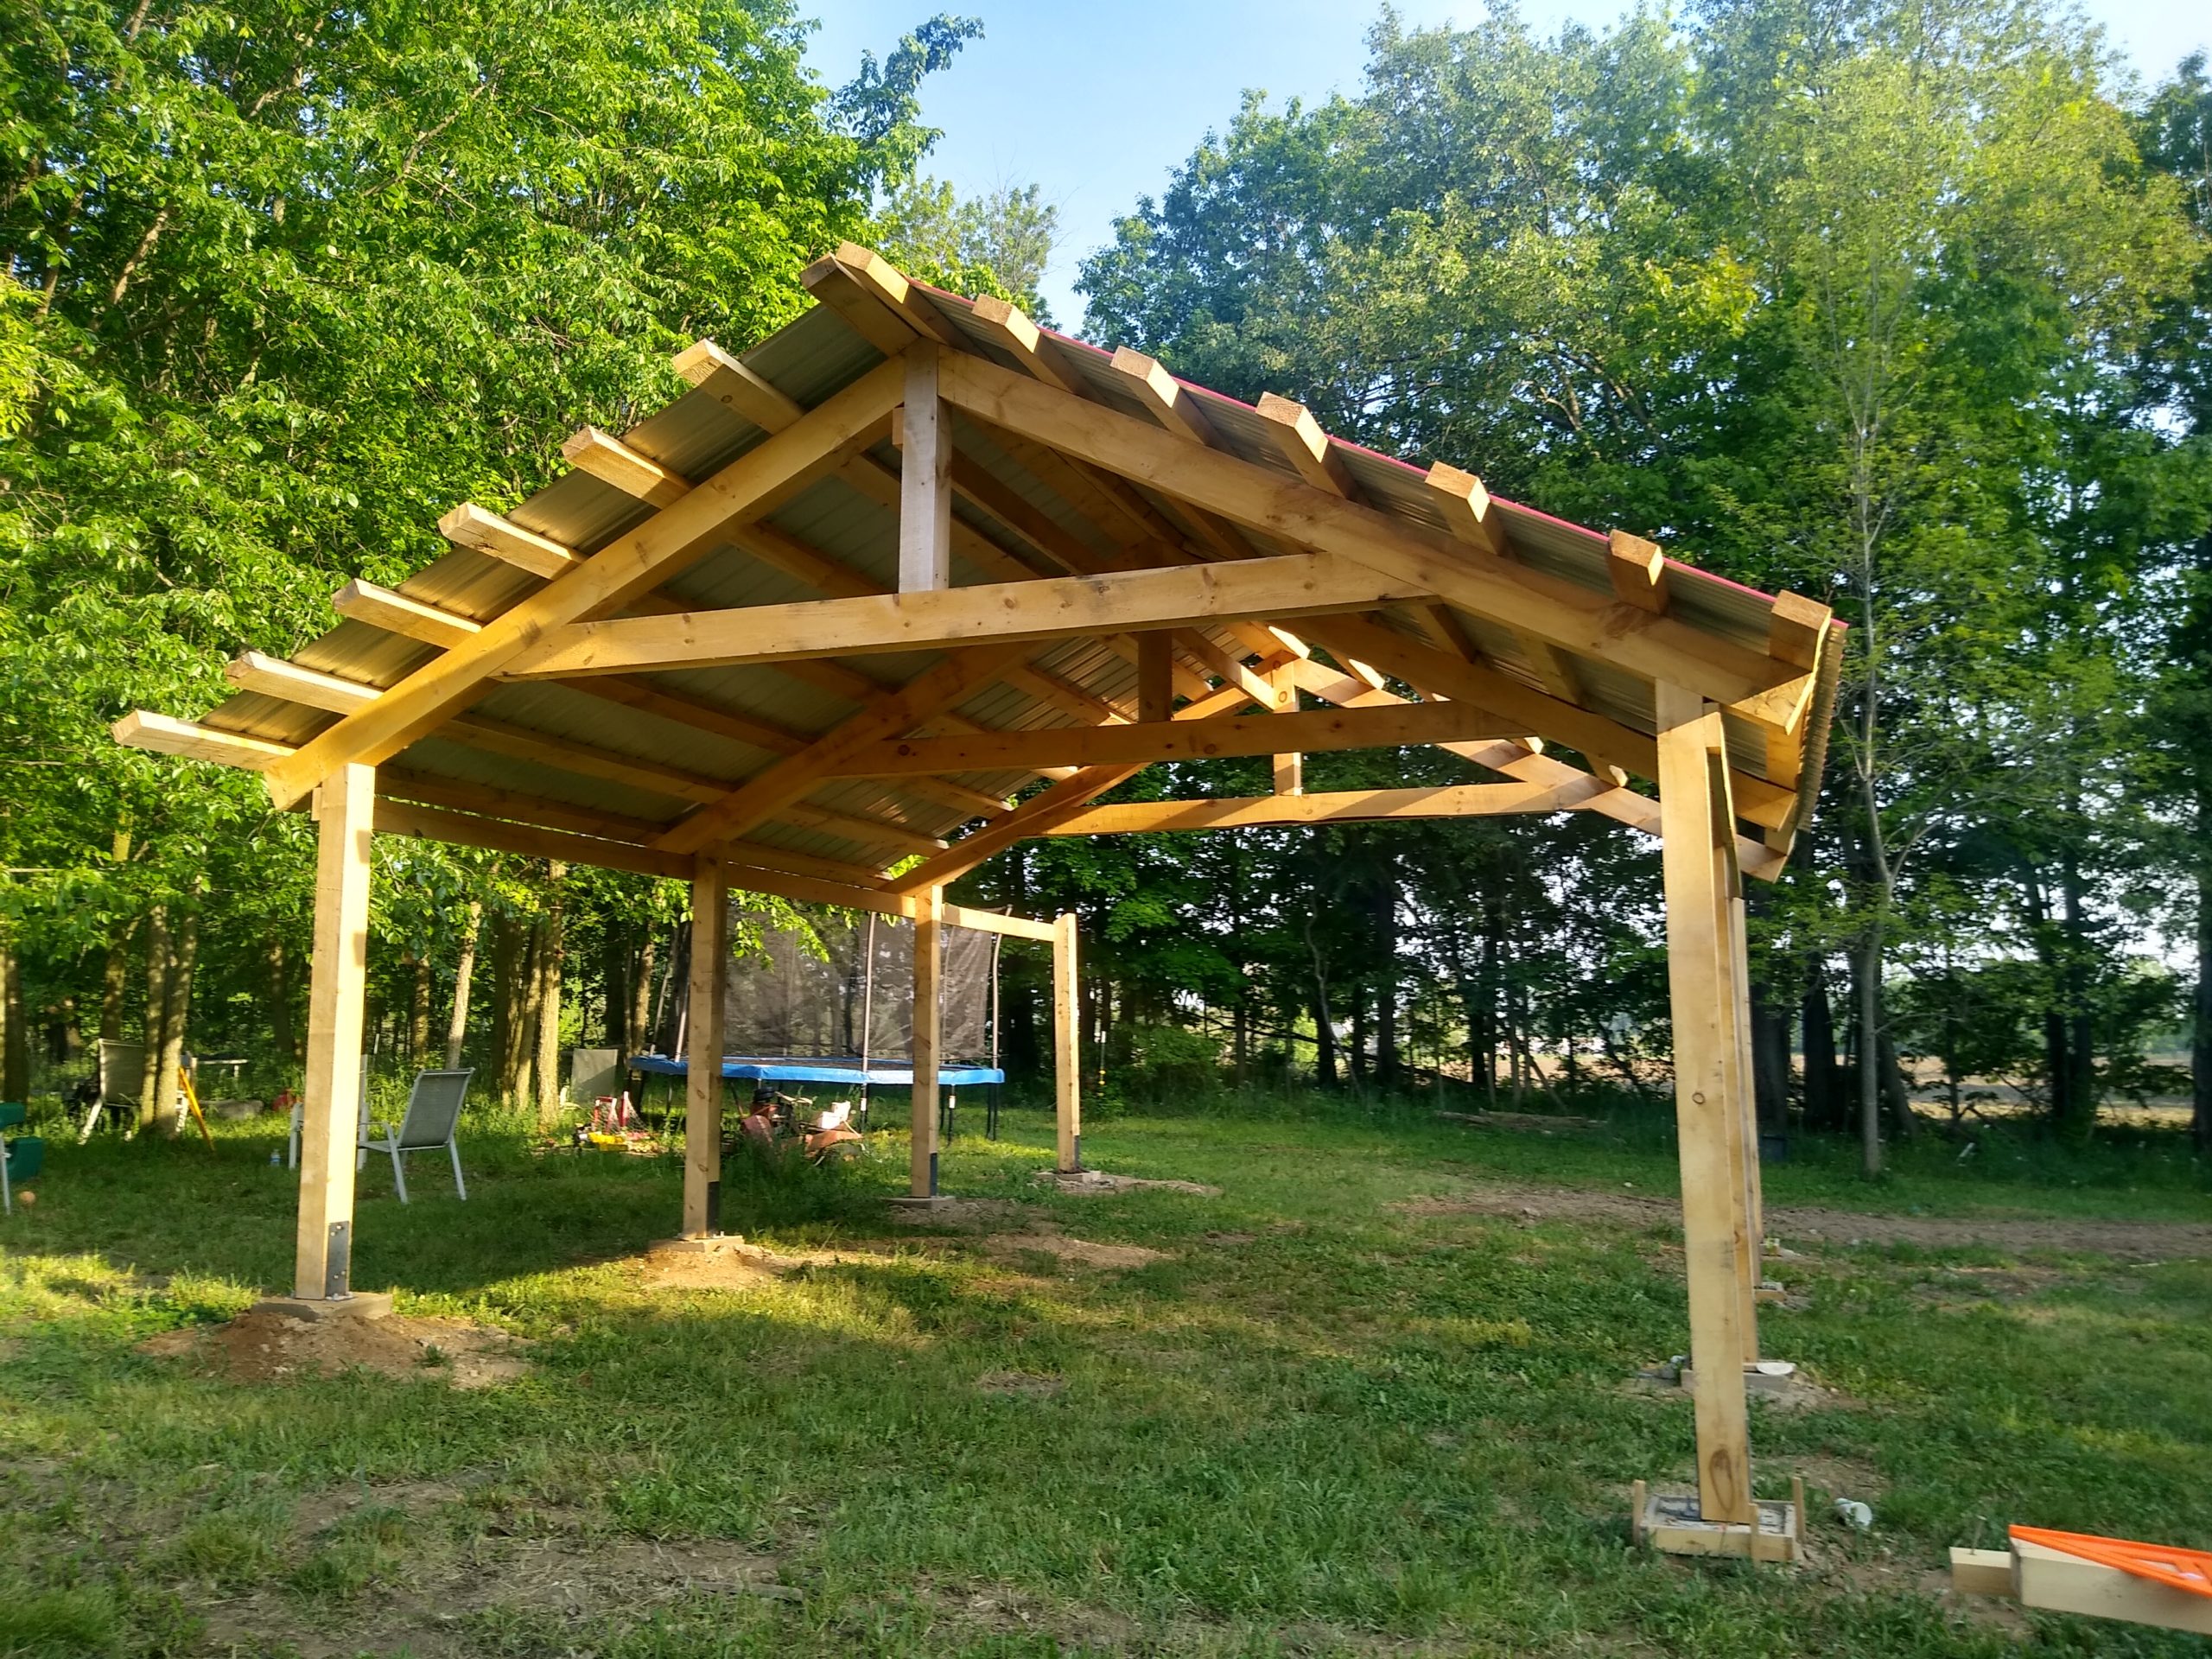 The 20x30 King Post barn as a pavilion